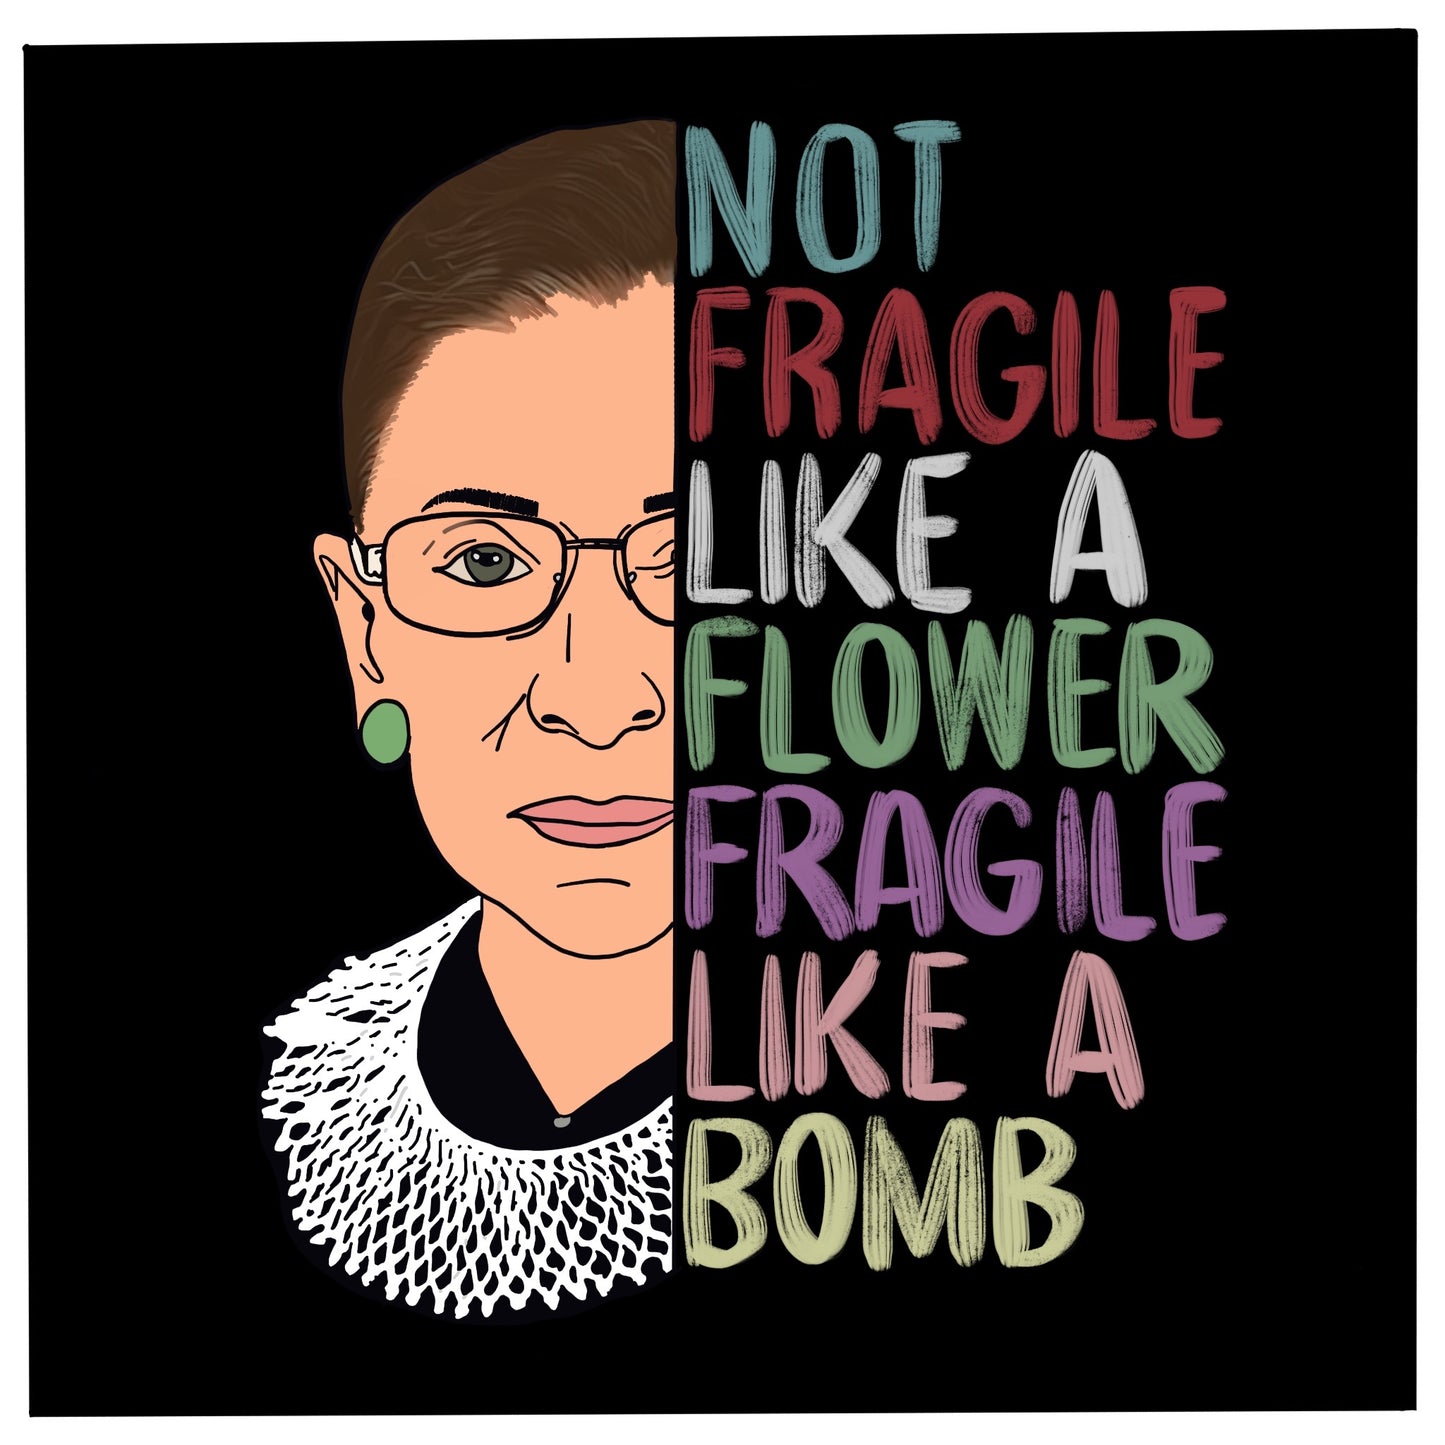 Ruth Bader Gindsburg "Not Fragile Like A Flower, Fragile Like A Bomb" Quote Sticker